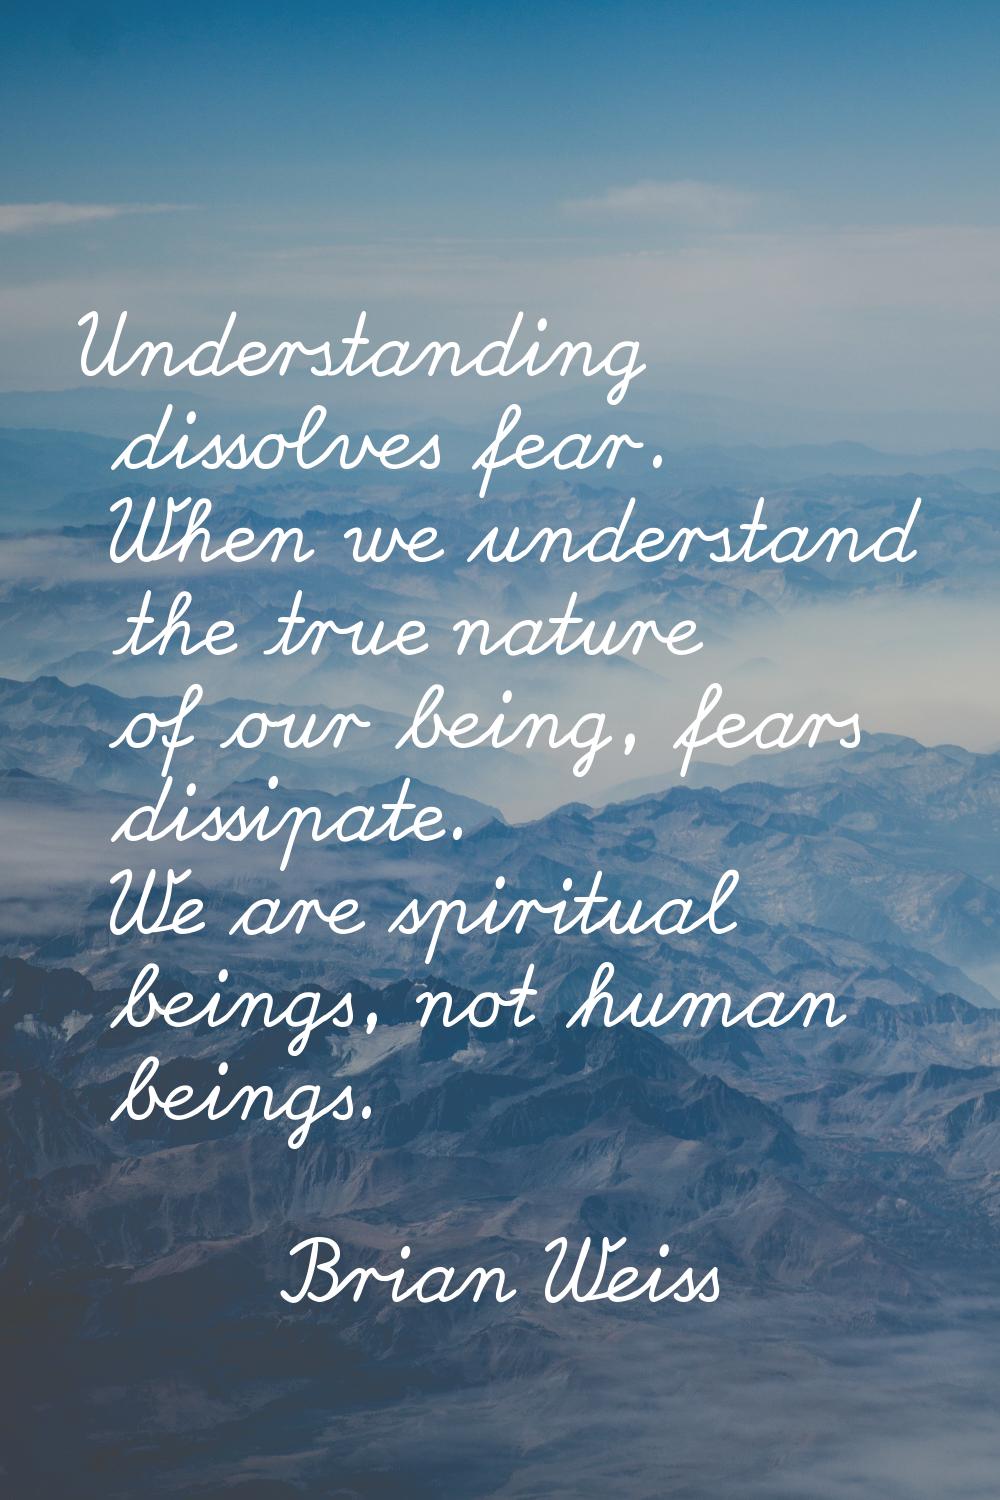 Understanding dissolves fear. When we understand the true nature of our being, fears dissipate. We 